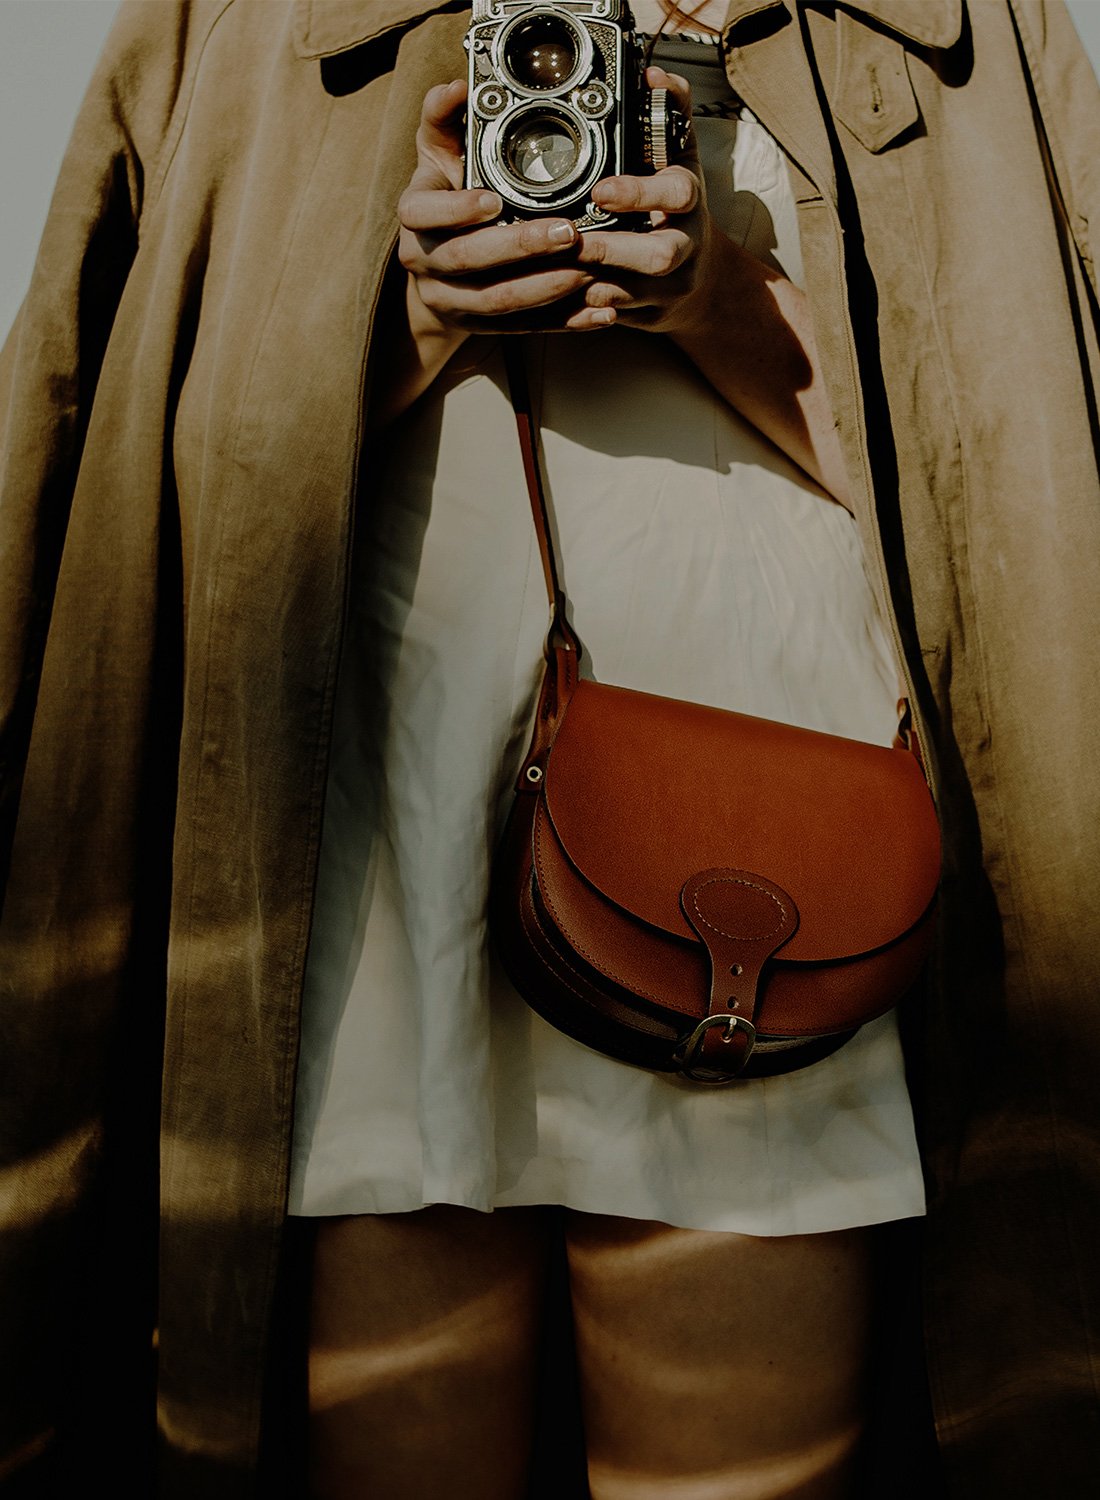 The Diane leather bag worn by a woman